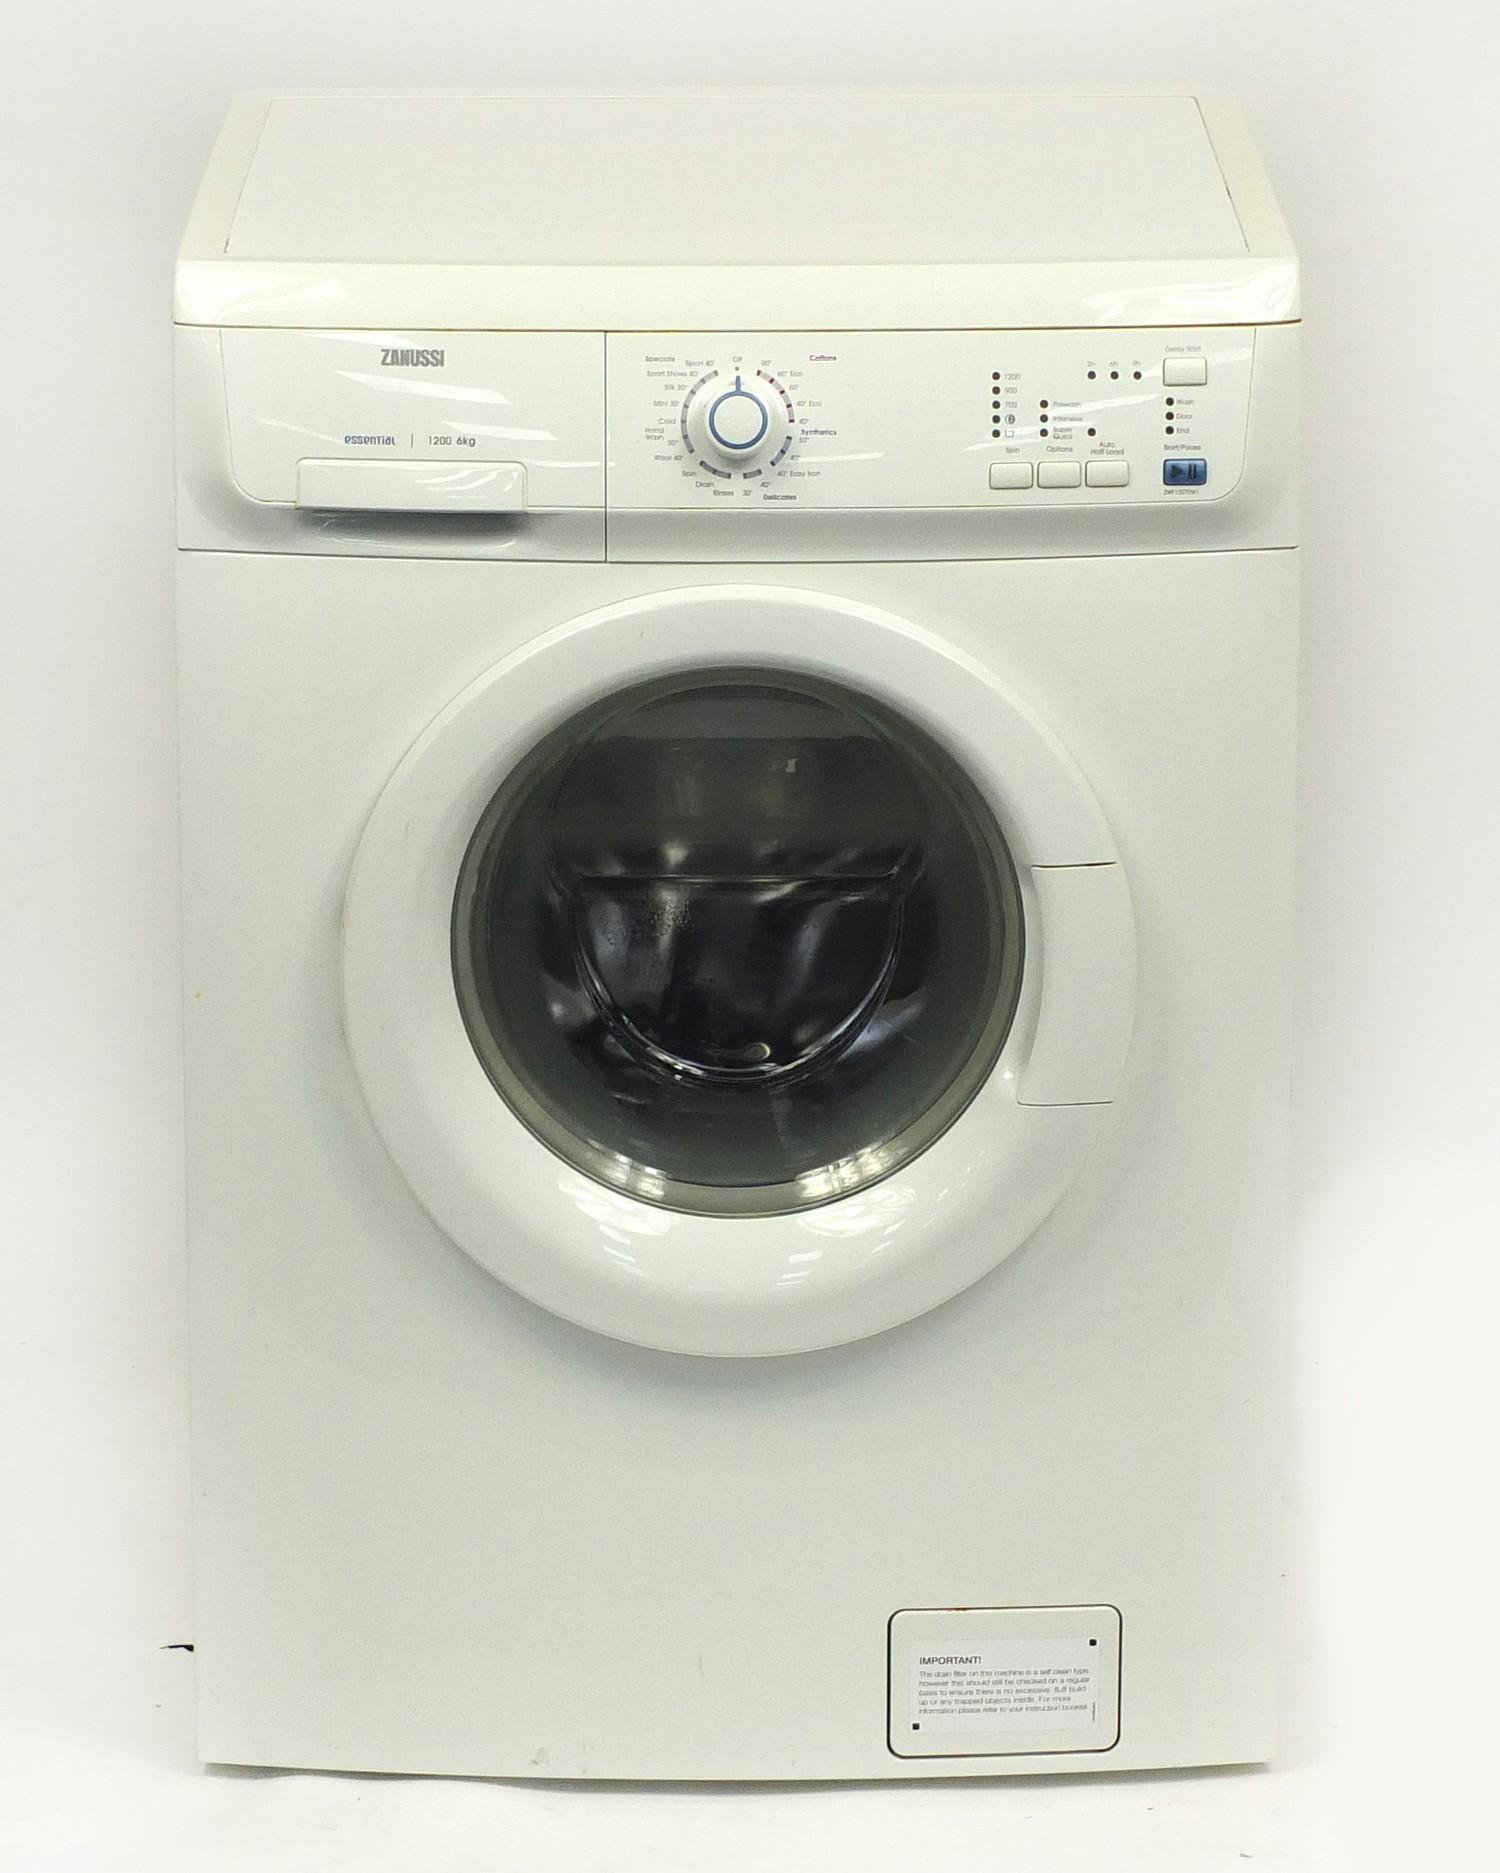 Zanussi Essential 1200 6kg washing machine : For Further Condition Reports Please Visit Our Website,